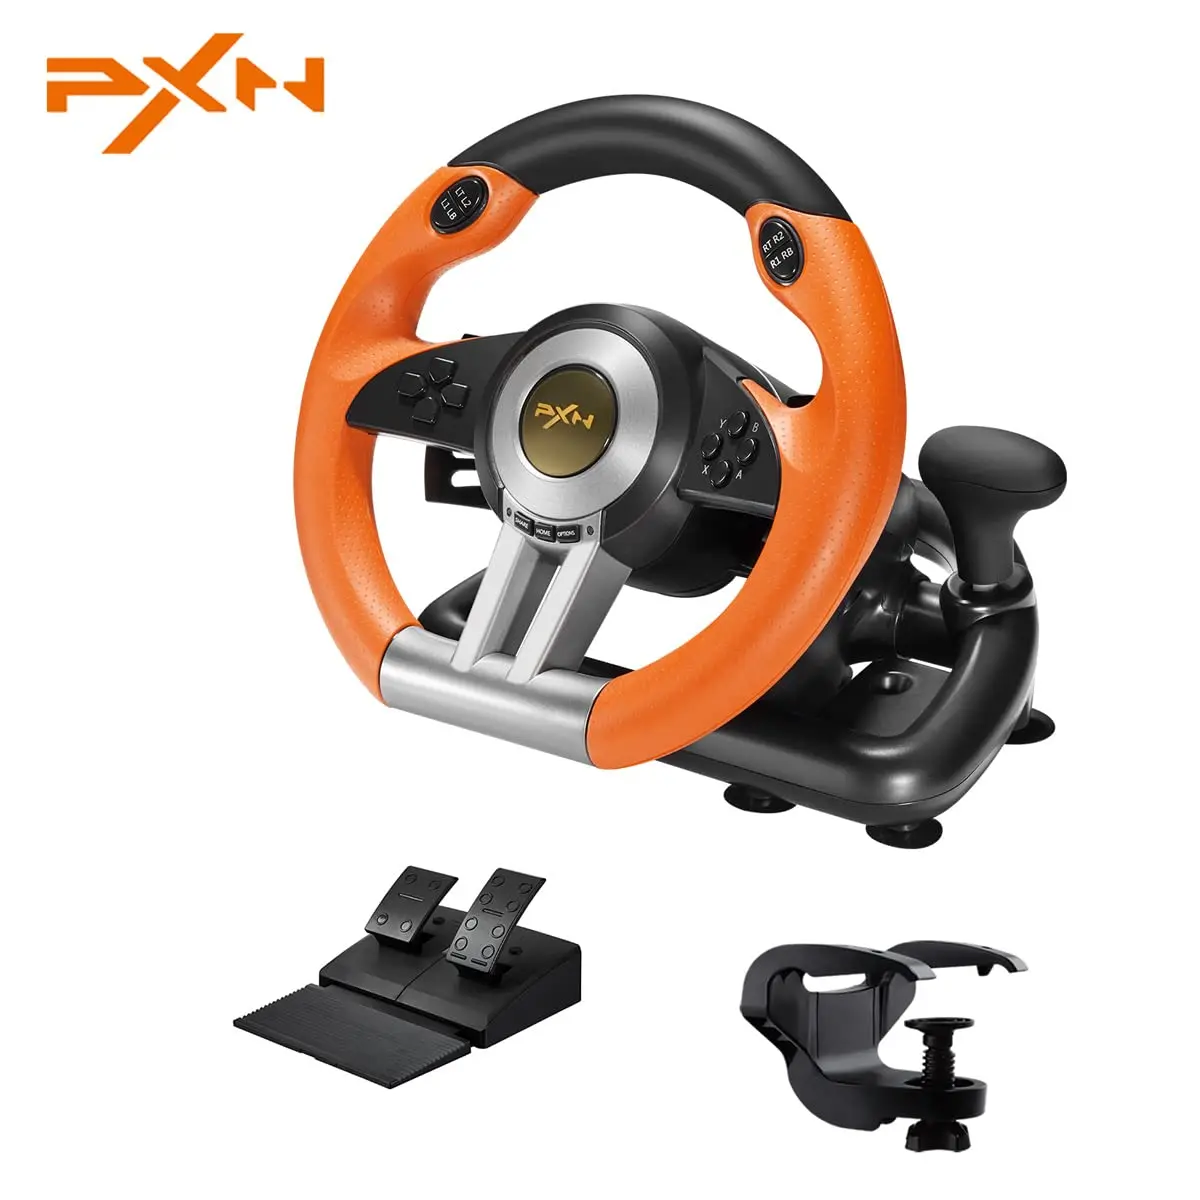 

PXN V3 Pro Game Steering Wheel Racing Simulator 180 Rotation Gaming Volante For PC Windows/PS4/SwitchXbox One/Xbox Series X/S